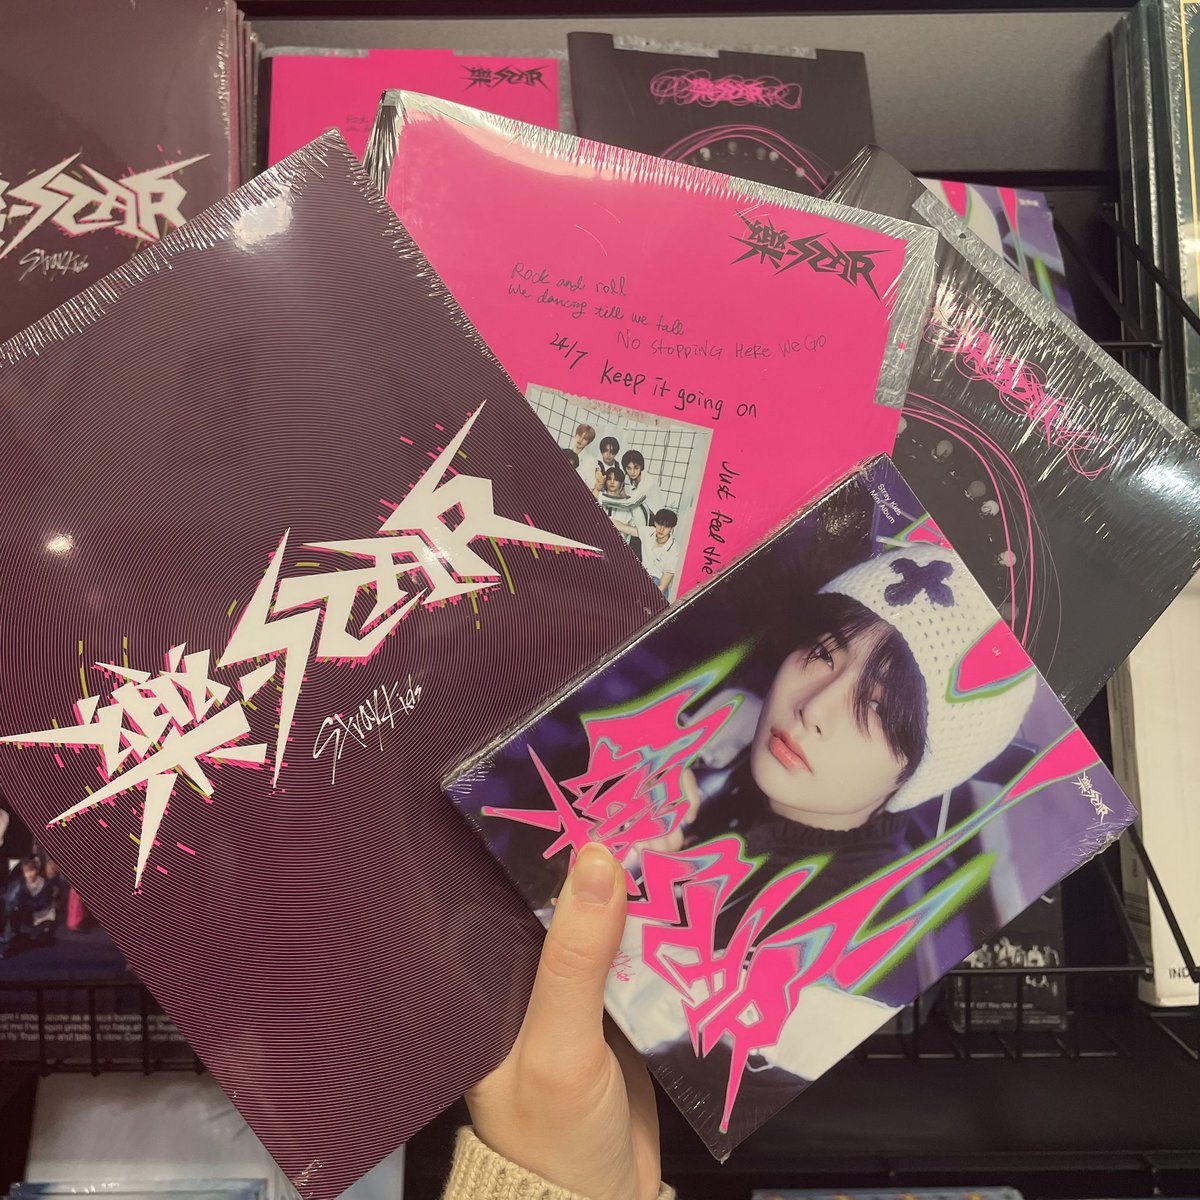 STAYs! 🖤 It’s here… the brand new album by Stray Kids has arrived in store! Pick up your copy of ROCK-STAR today! Limited, Rock, Roll and Postcard versions available 🩷 #StrayKids #樂_STAR #ROCK_STAR #StrayKidsComeback #YouMakeStrayKidsStay @ukskzunited